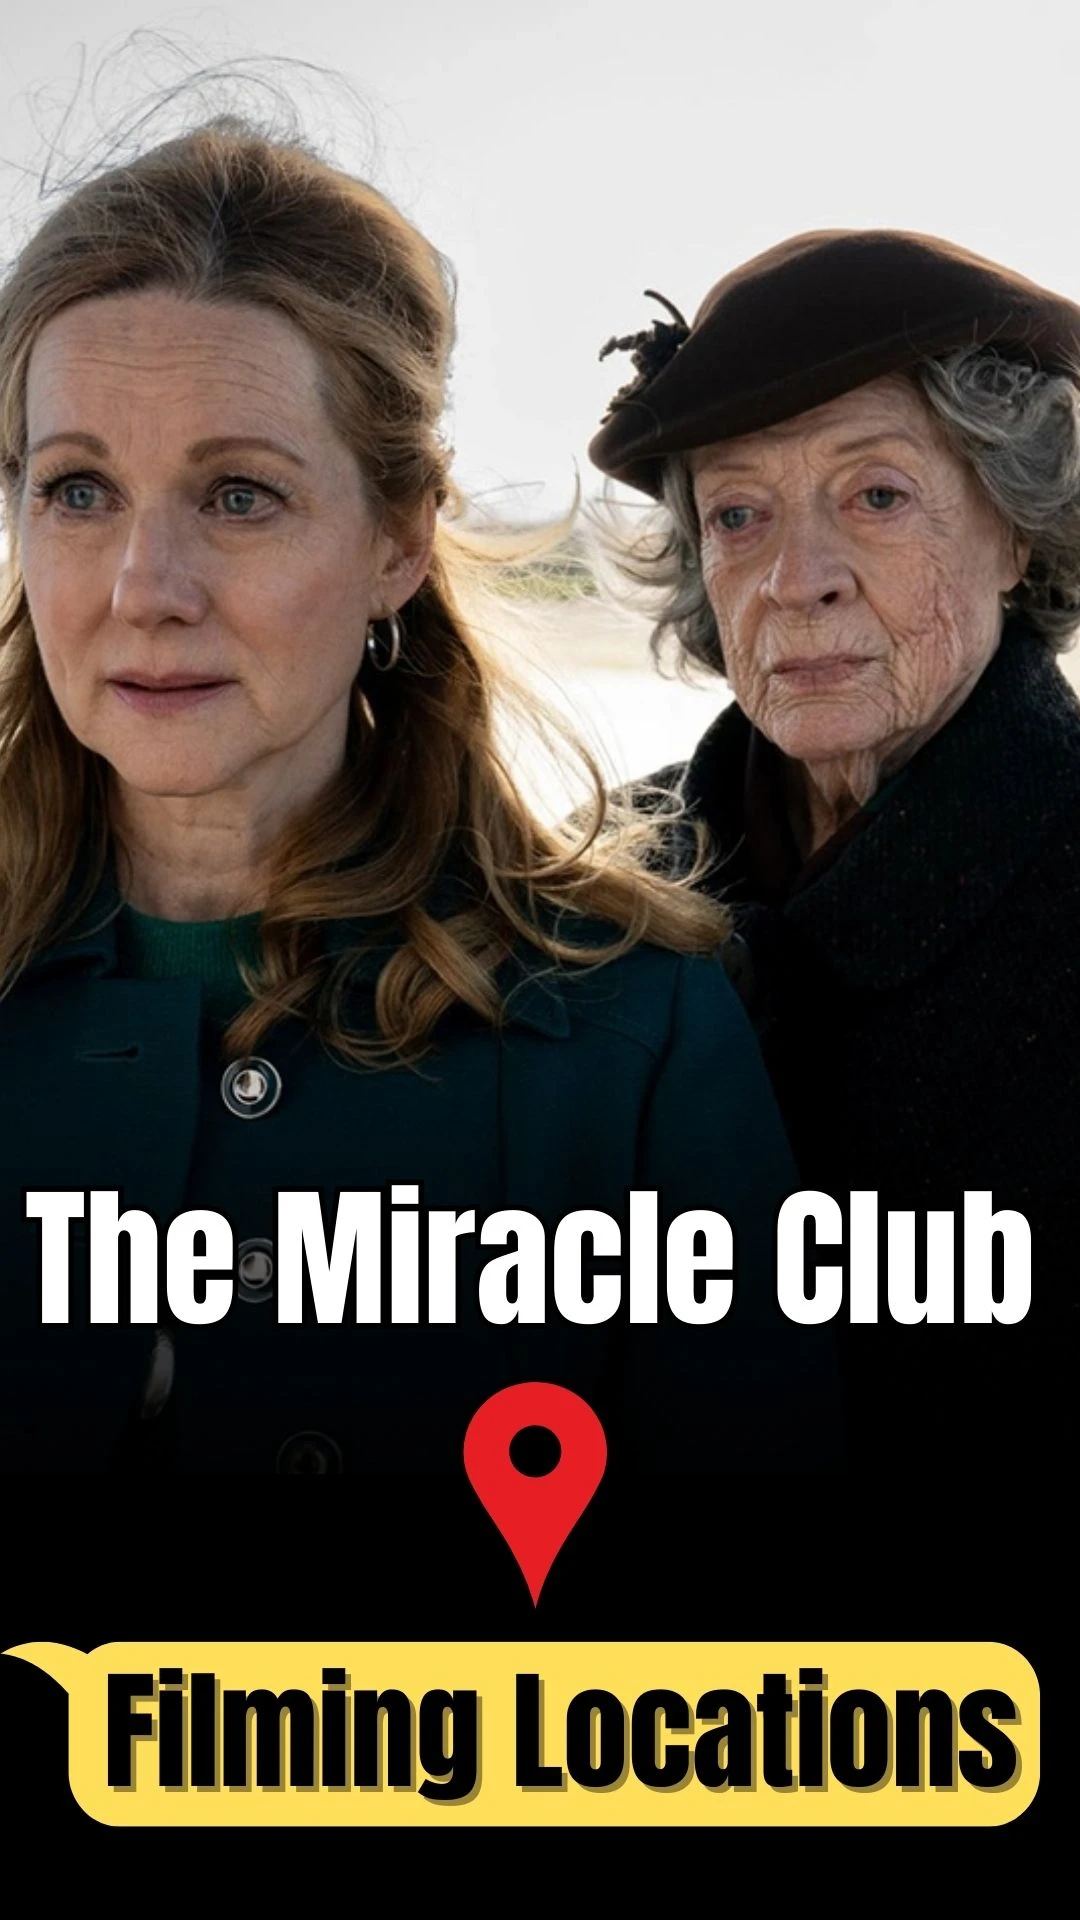 The Miracle Club Filming Locations